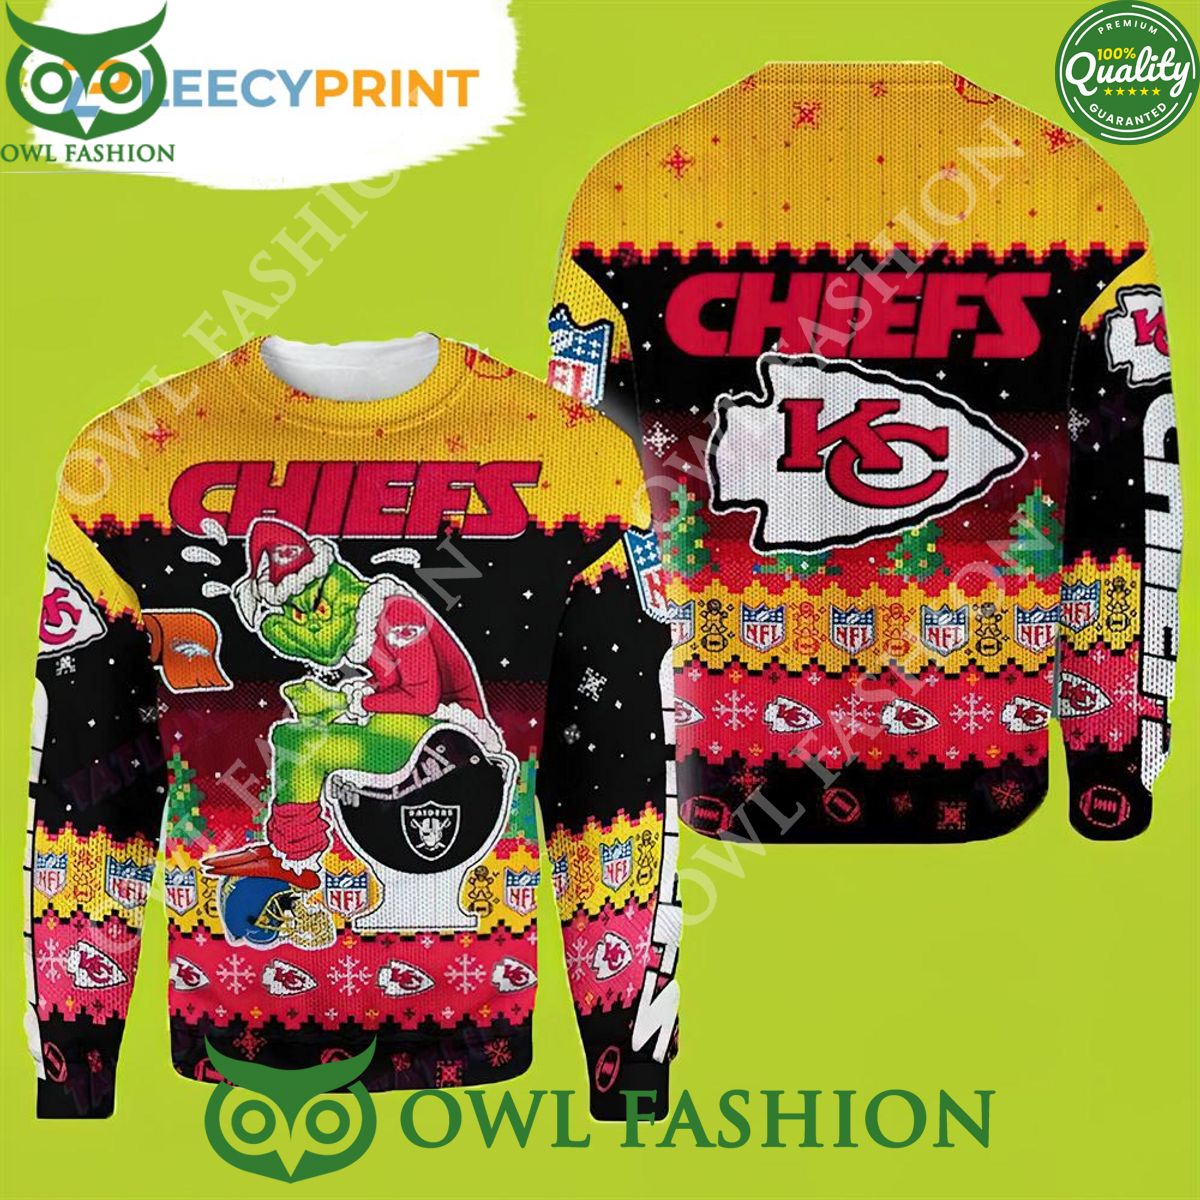 grinch stole christmas kansas city chiefs the toilet american football nfl ugly sweater jumper 1 GvBHD.jpg